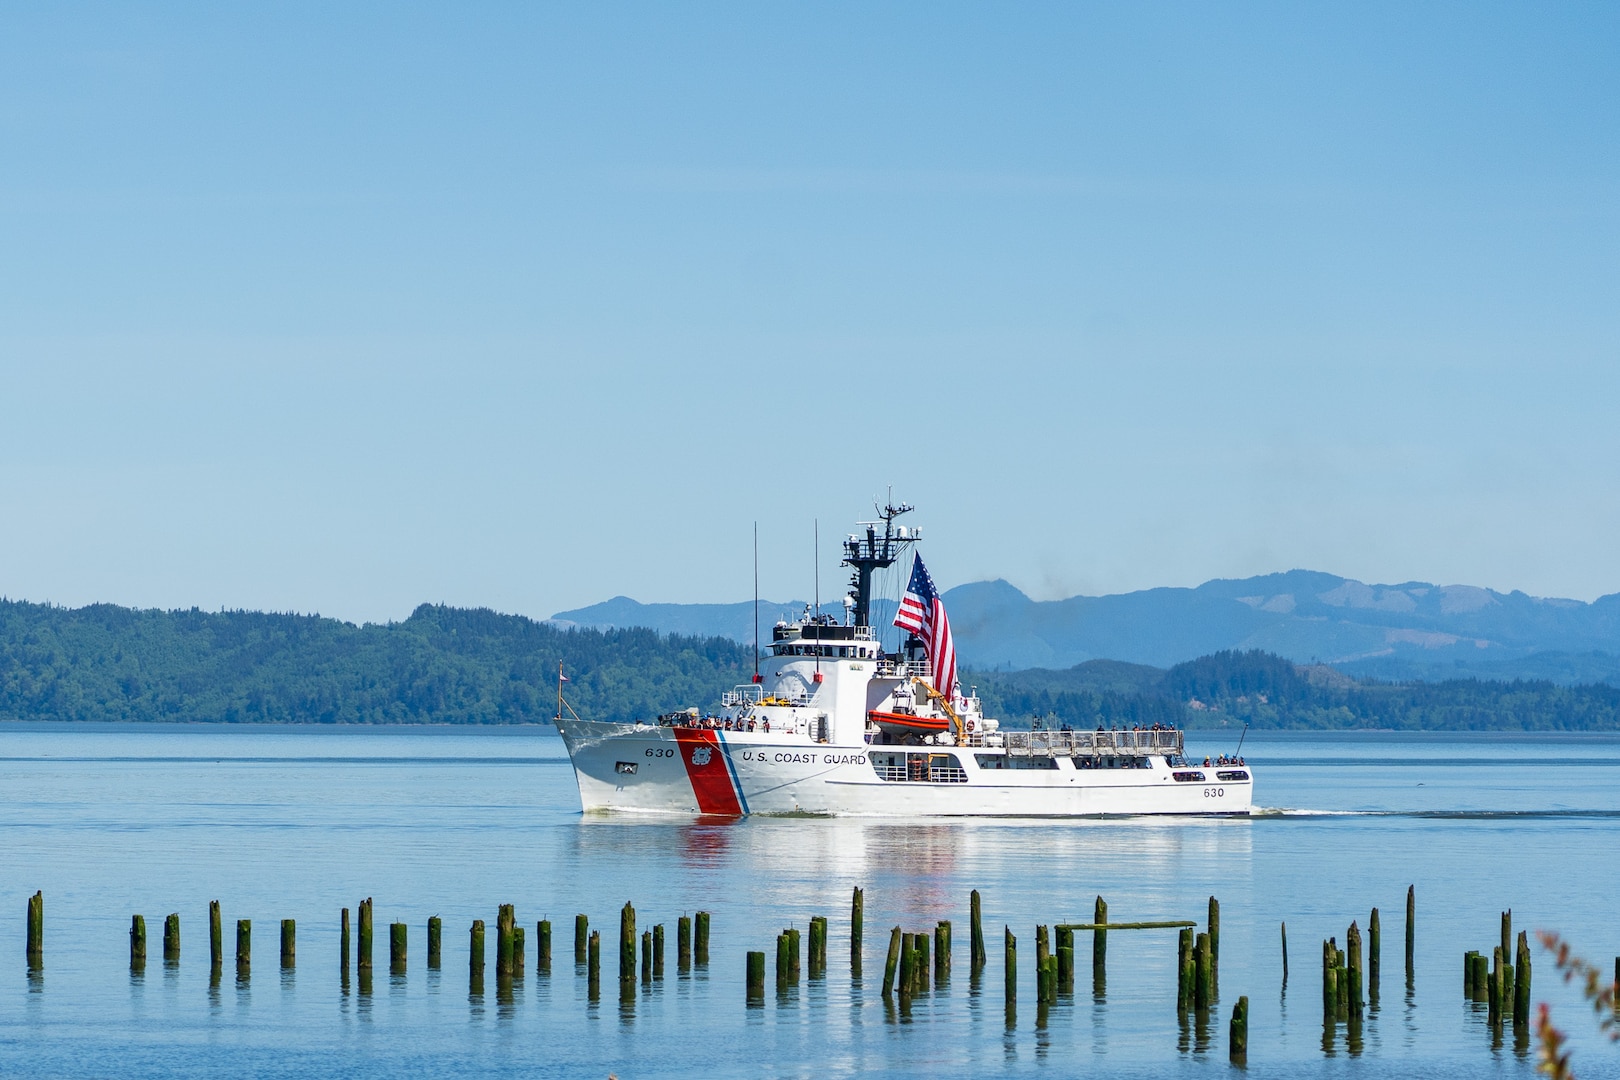 The crew of Coast Guard Cutter Alert departs Astoria, Oregon, on the Columbia River May 10, 2024. Alert is a 210-foot Medium Endurance Cutter. (U.S. Coast Guard photo by Petty Officer 1st Class Travis Magee)